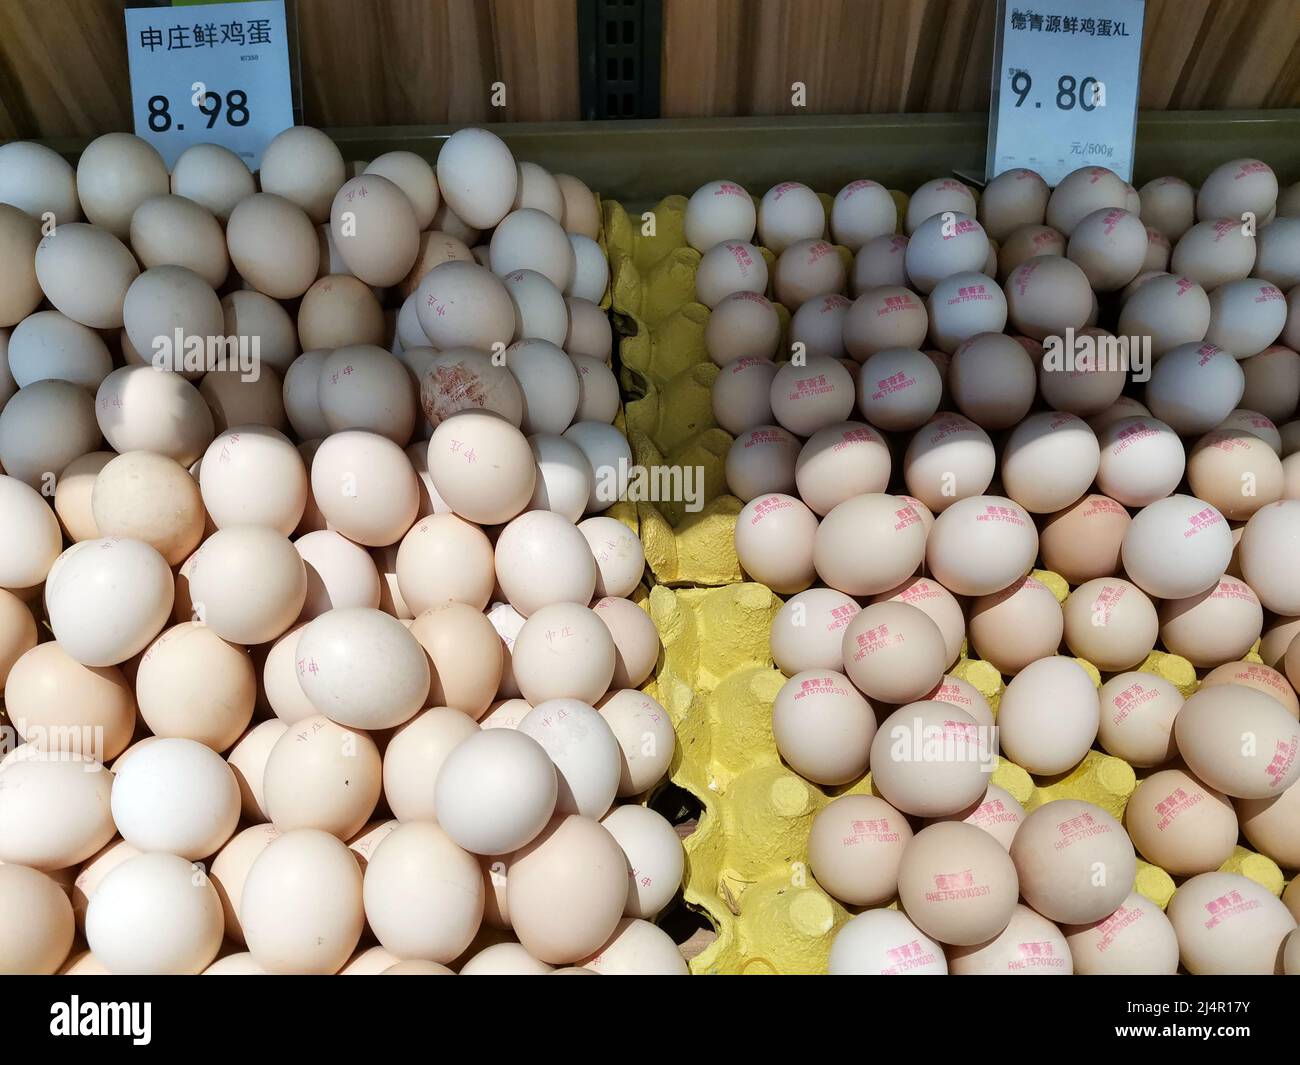 YICHANG, CHINA - APRIL 17, 2022 - Eggs on sale at a supermarket in Yichang, Hubei Province, China, April 17, 2022. Global egg prices have soared due t Stock Photo